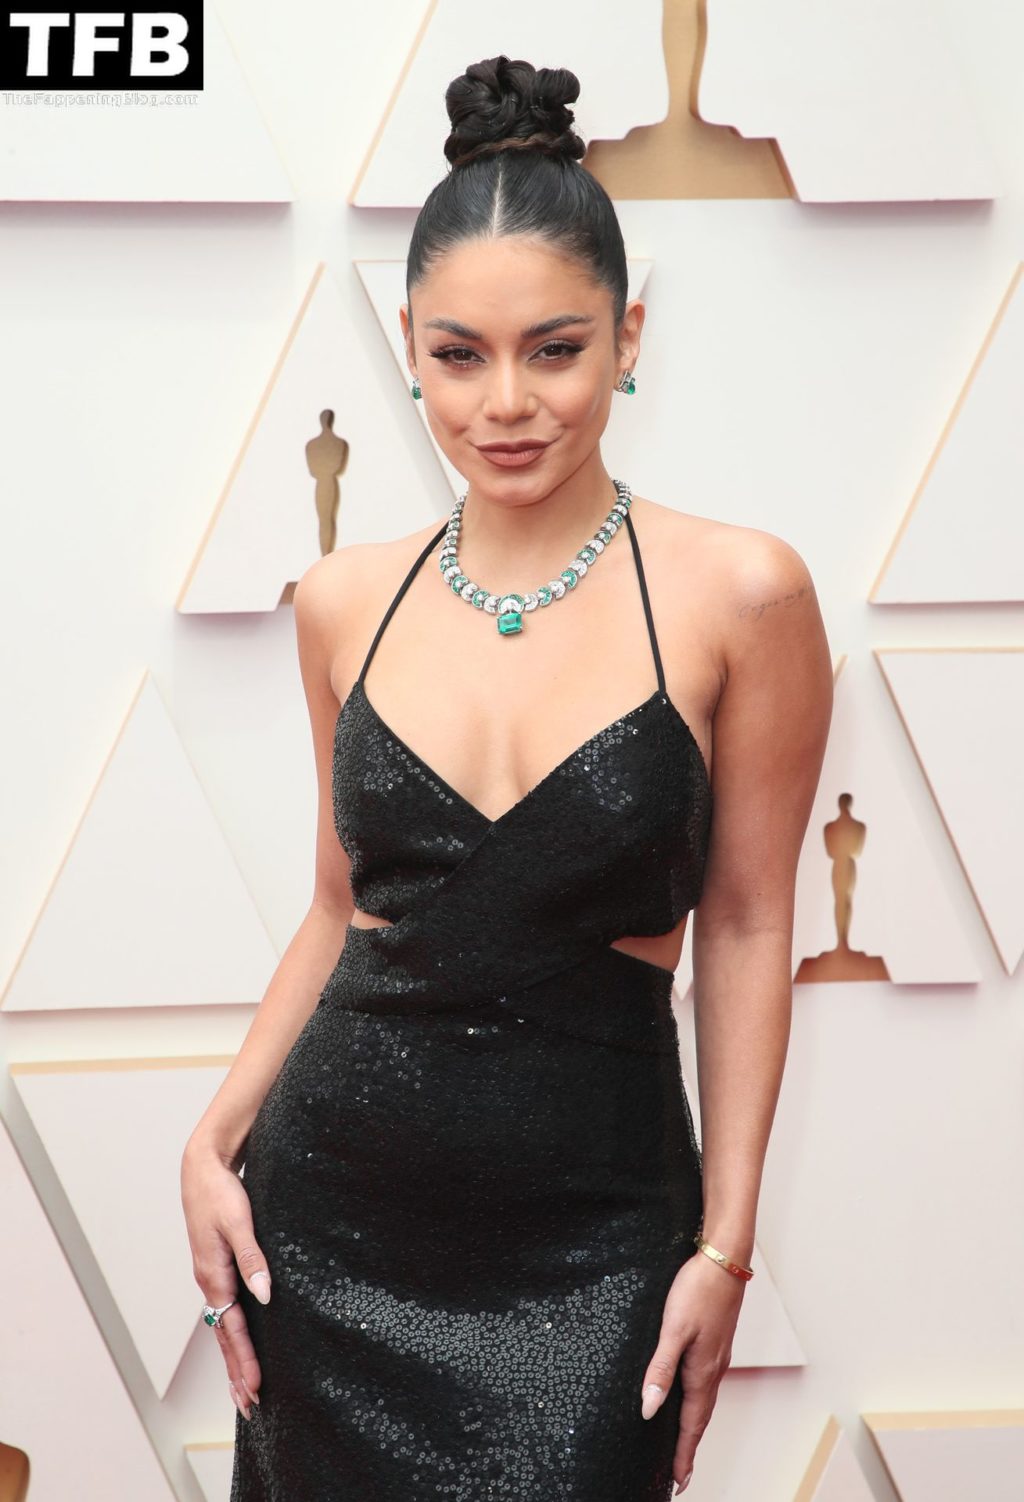 Vanessa Hudgens Sexy The Fappening Blog 45 3 1024x1502 - Vanessa Hudgens Poses on the Red Carpet at the 94th Annual Academy Awards (83 Photos)